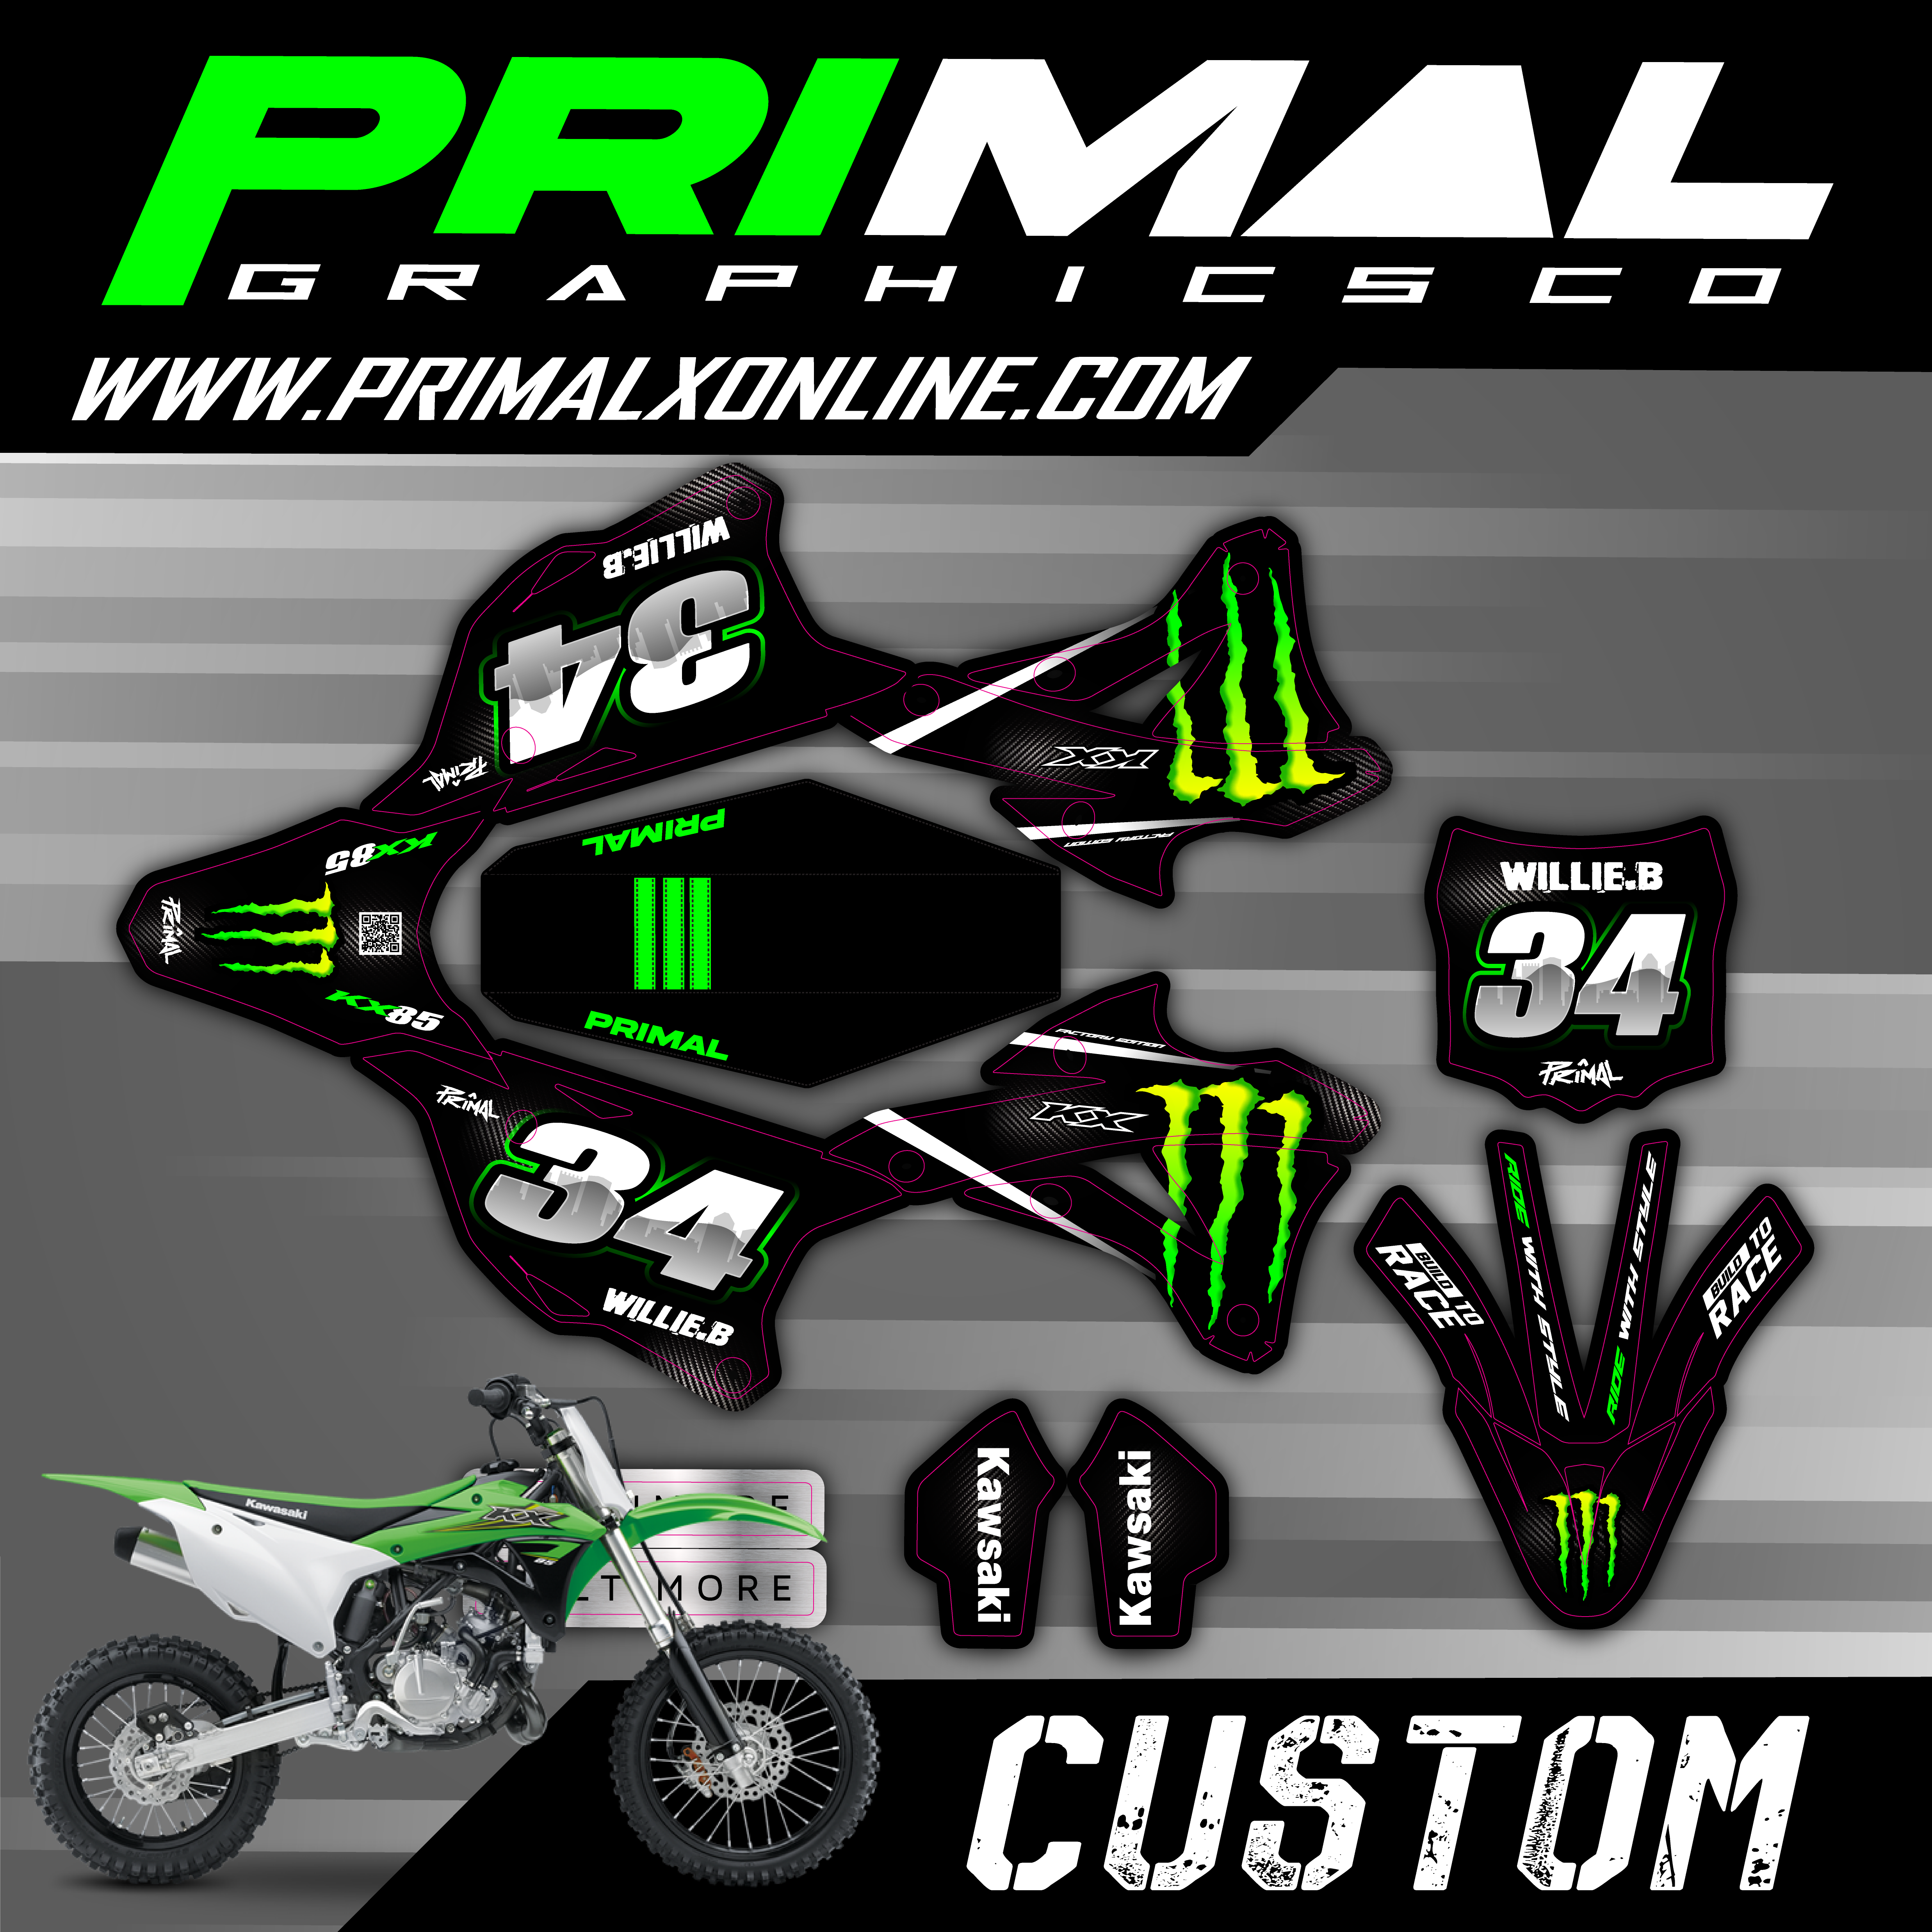 PRIMAL-GRAPHICS-CO-BALTIMORE-RAISE-IT-UP-BIKELIFE-MONSTER-EDITION-KX-01